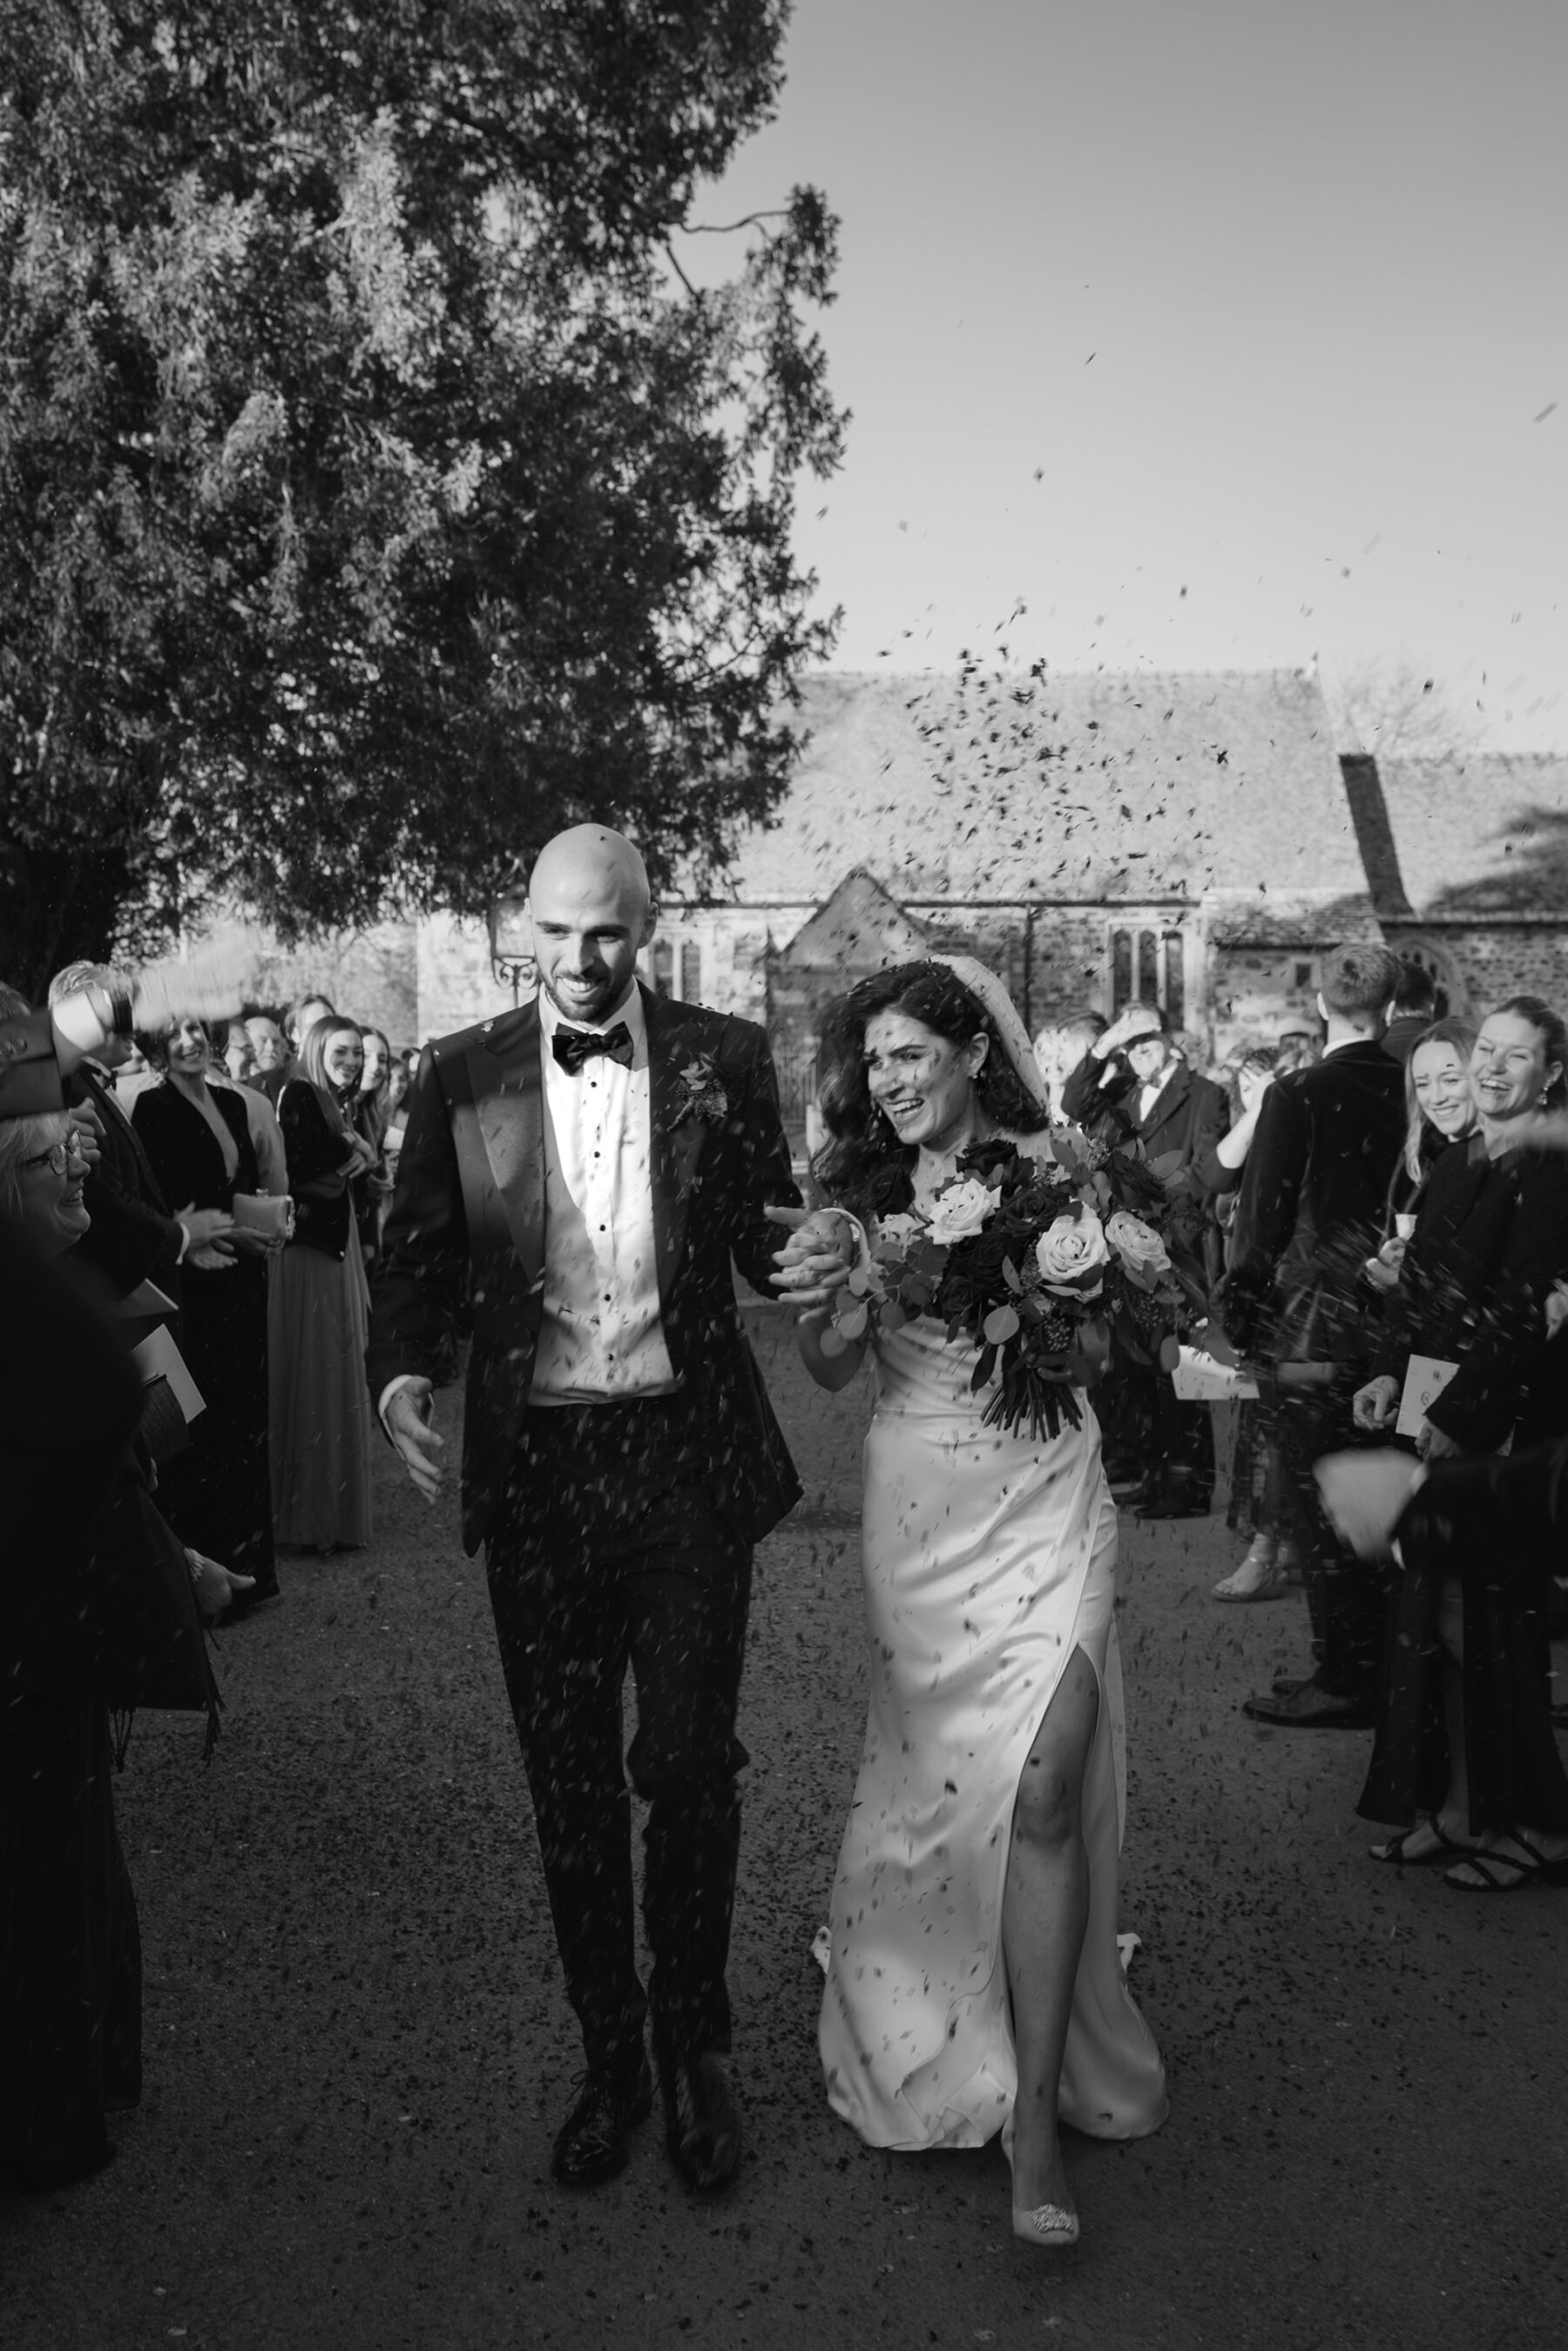 Bride and groom exiting their wedding ceremony in a shower of Confetti at Somerley House in Hampshire